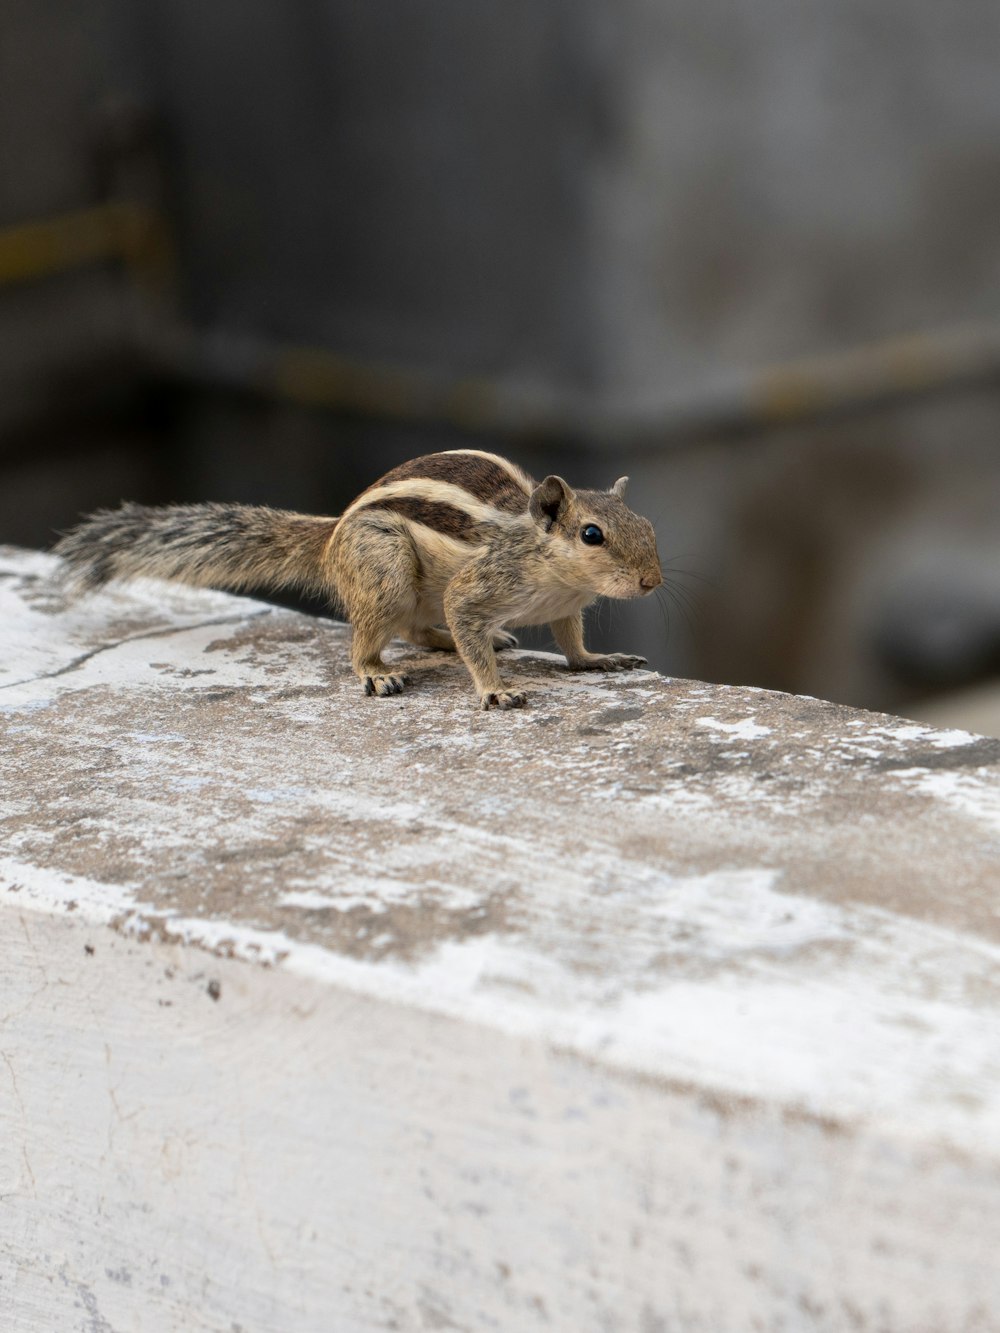 a small squirrel is standing on a ledge